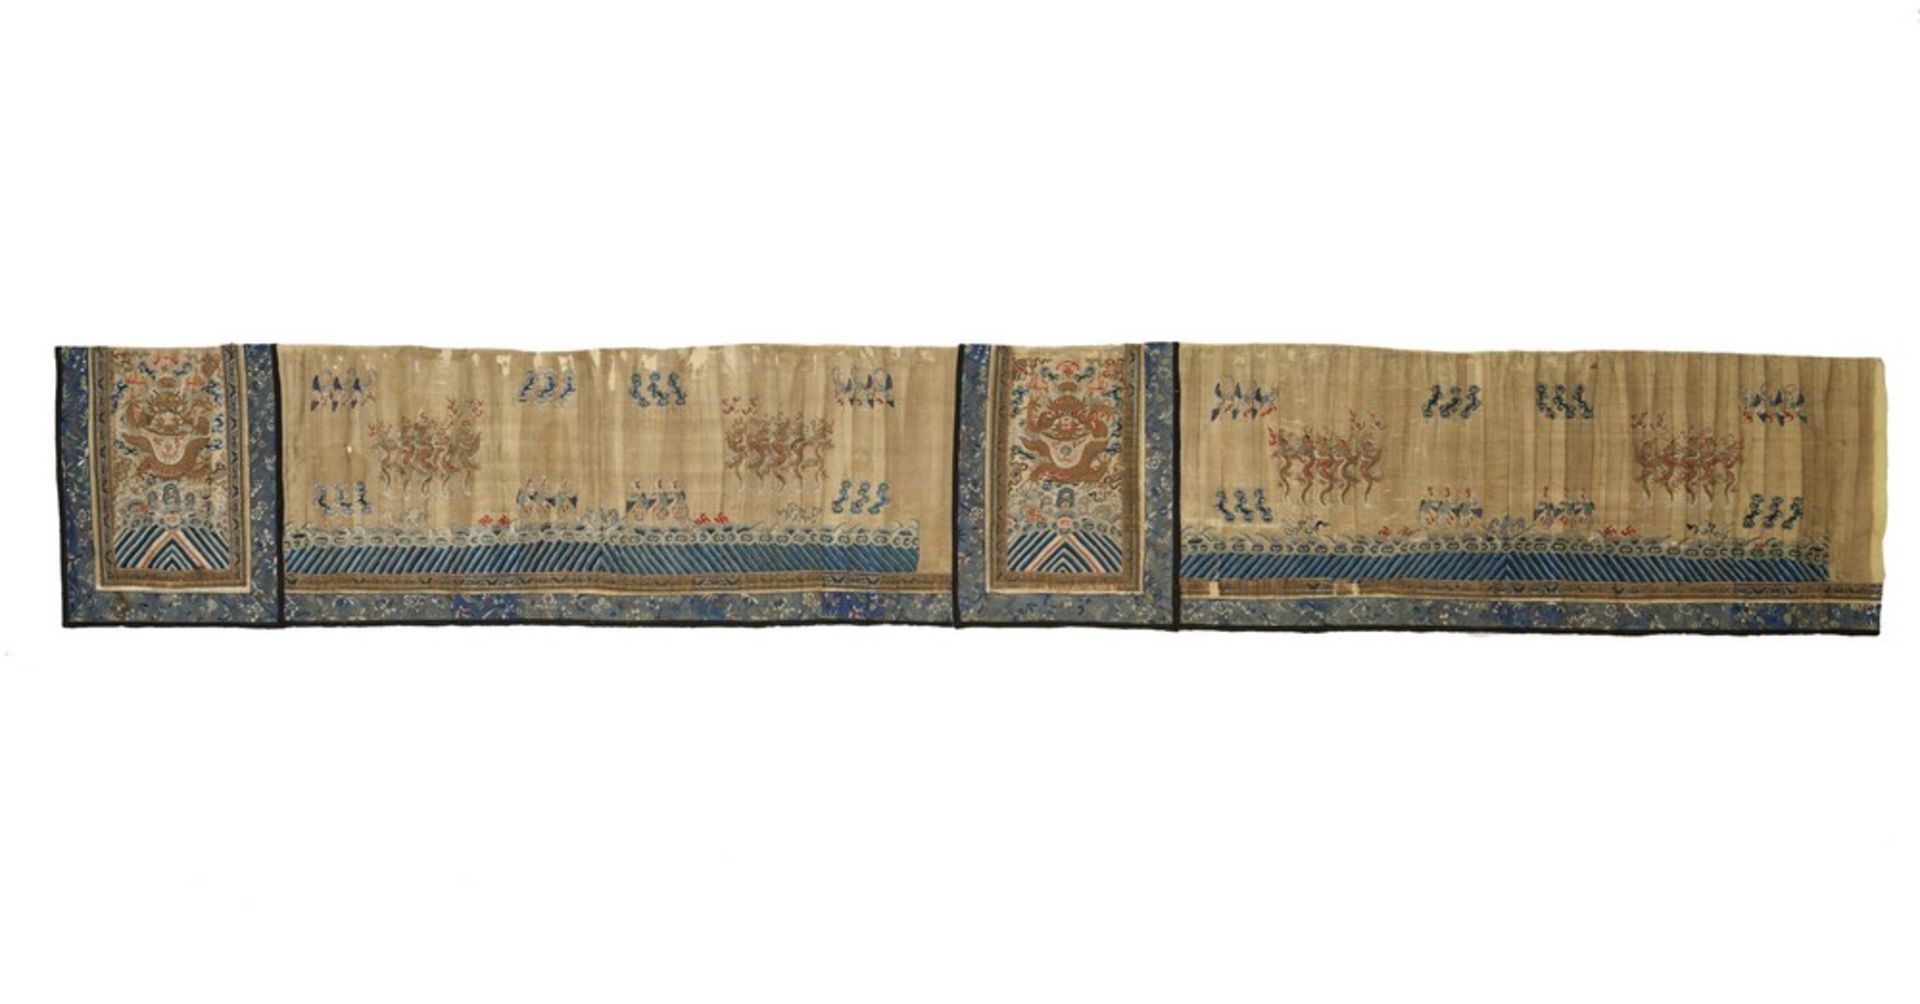 A LARGE EMBROIDERED TEXTILE BAND, QING DYNASTY